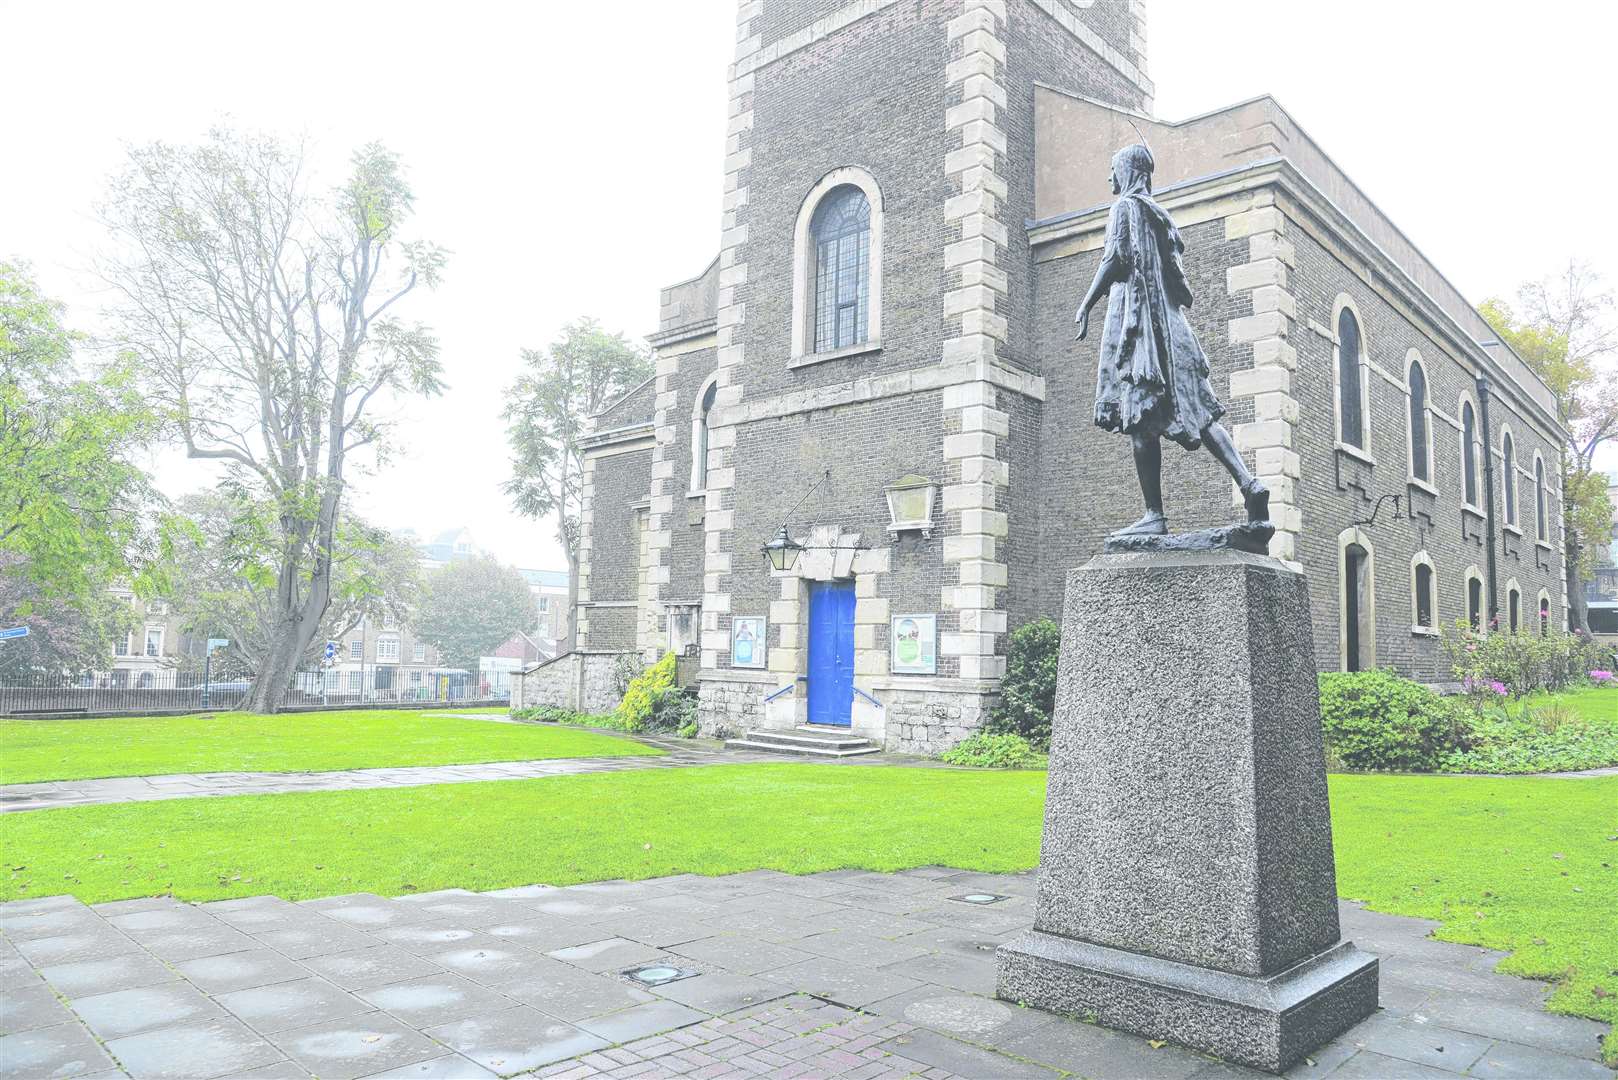 The Pocahontas statue at St George's Church in Gravesend